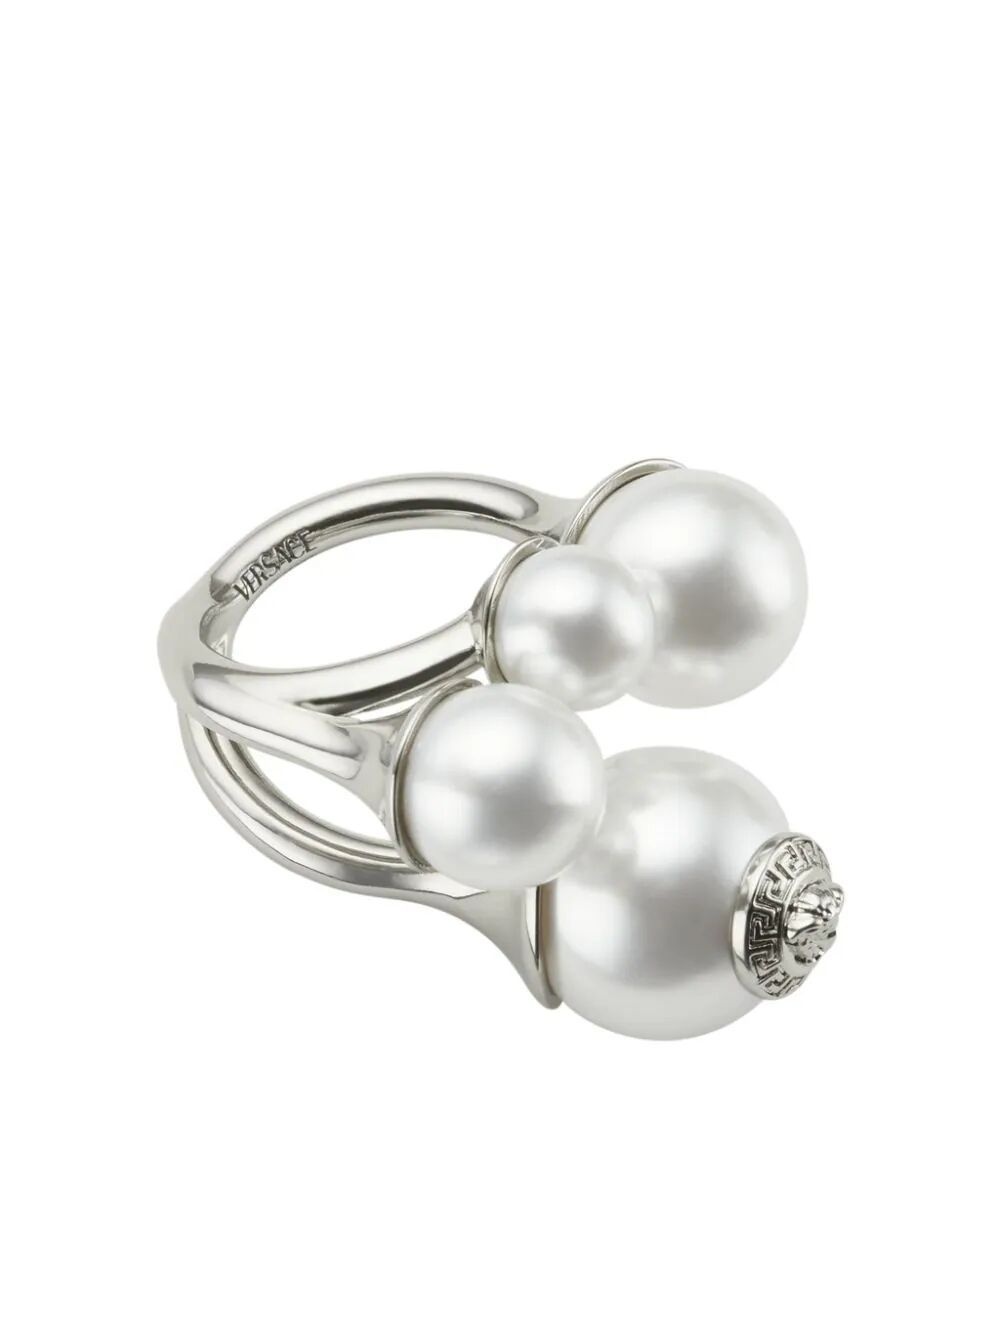 RING METAL WITH PEARL - 2